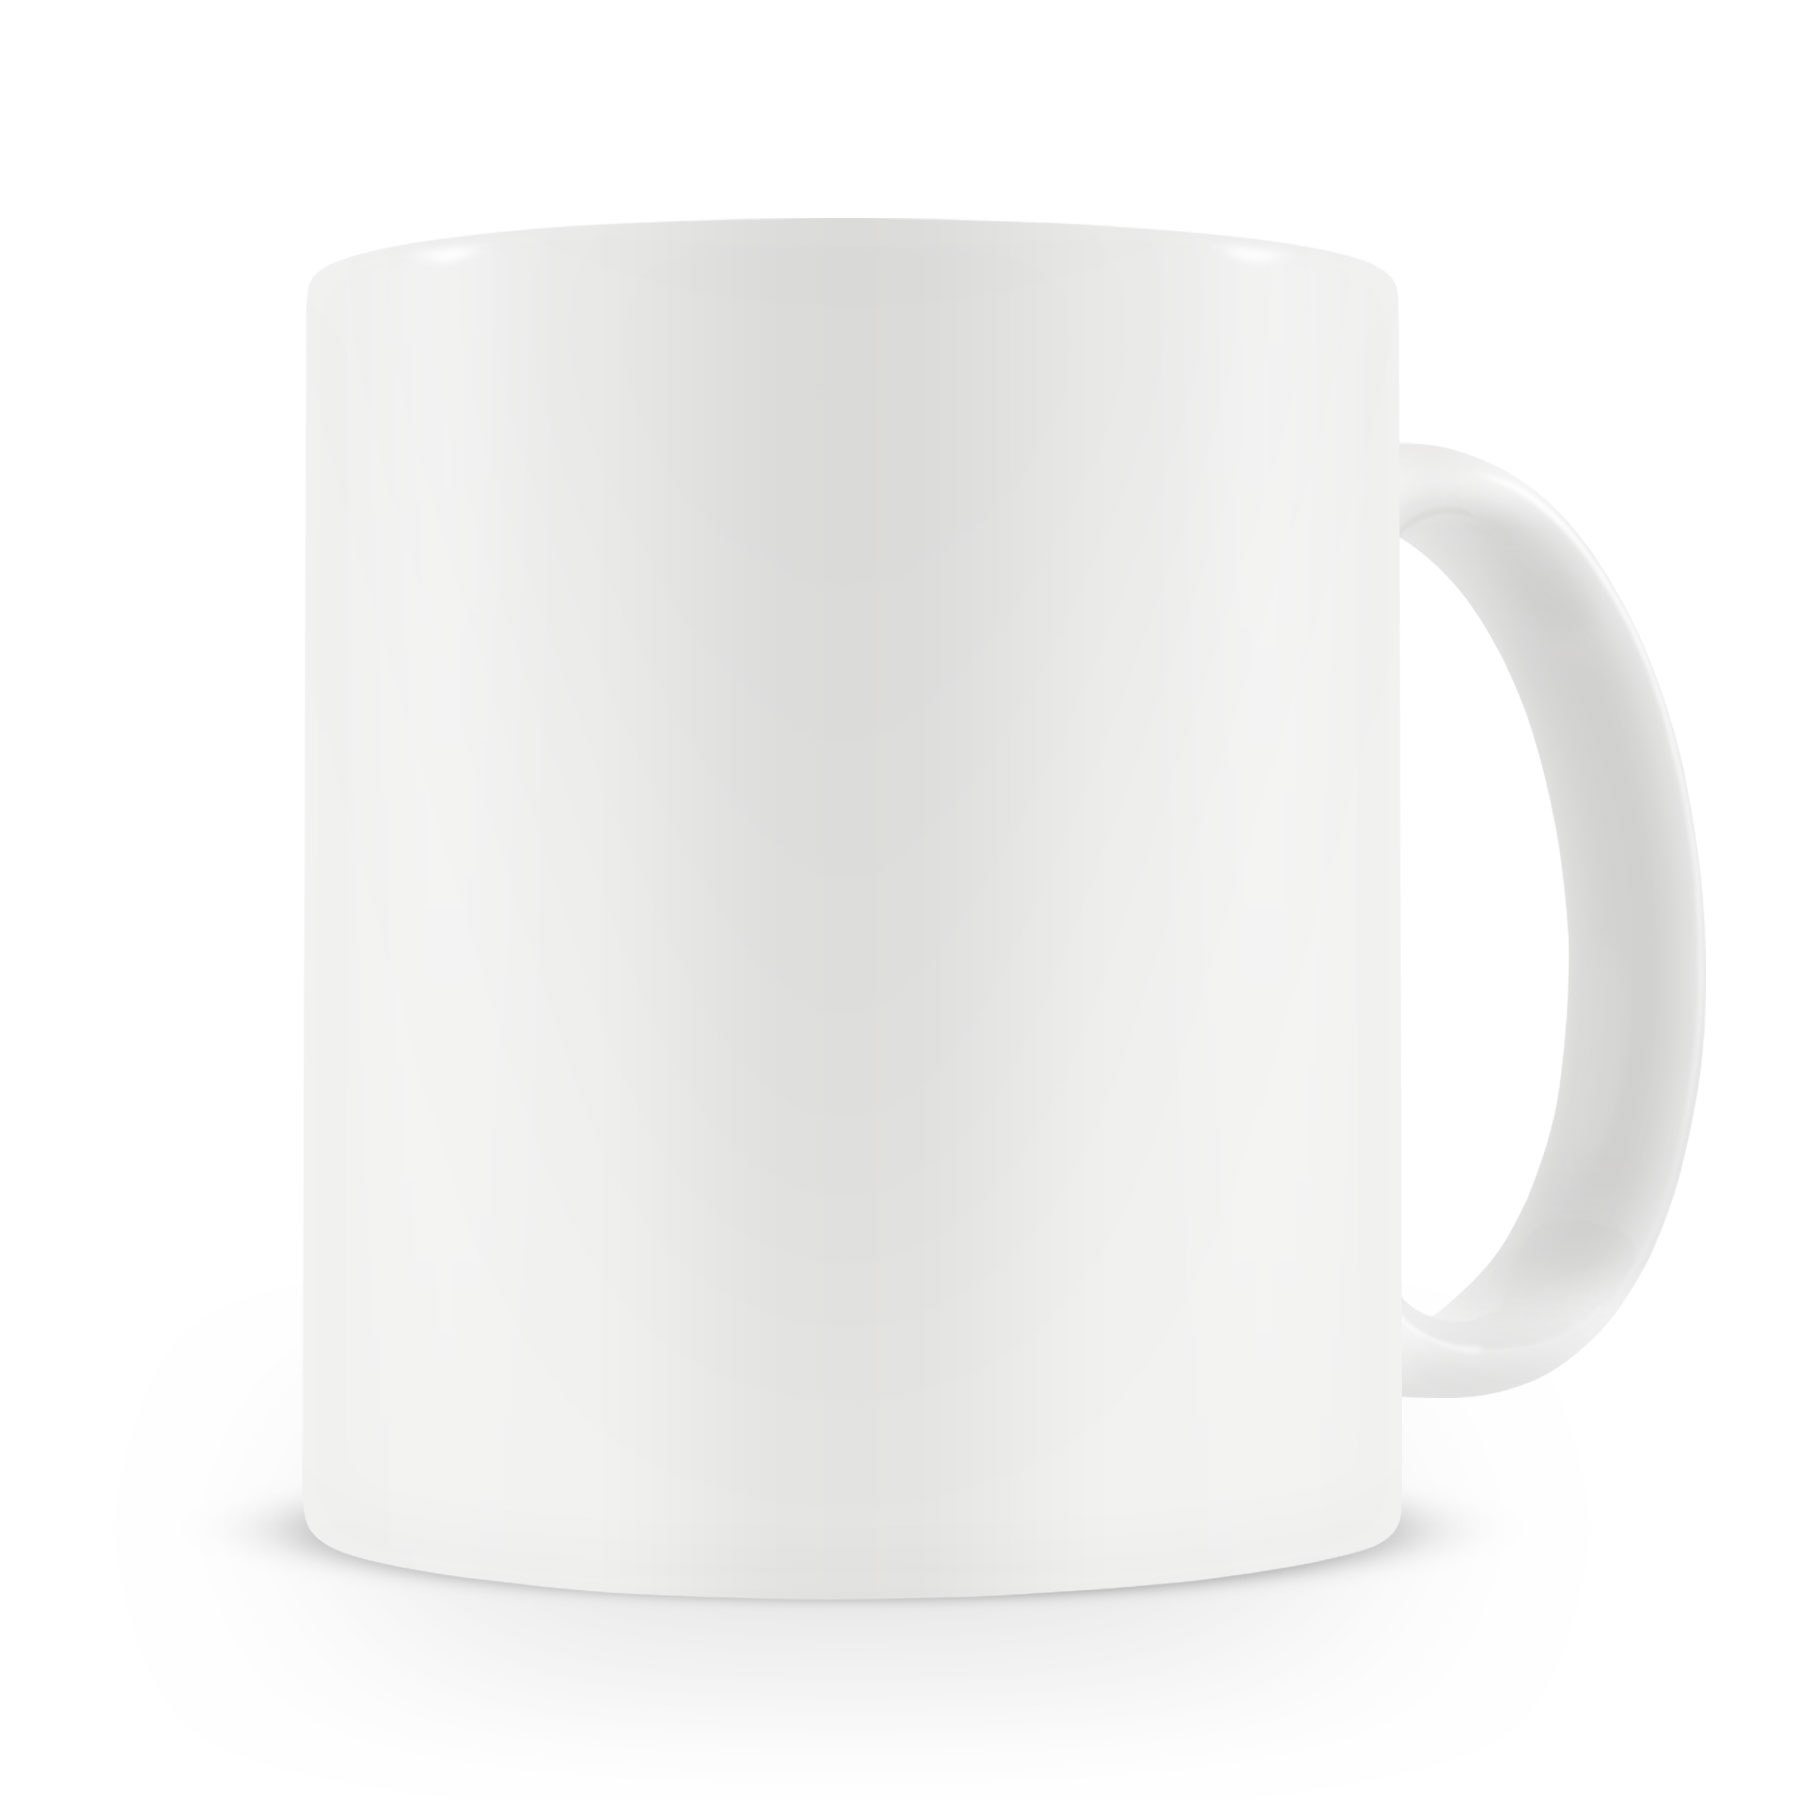 Do you offer different sizes and styles of custom logo coffee mugs?